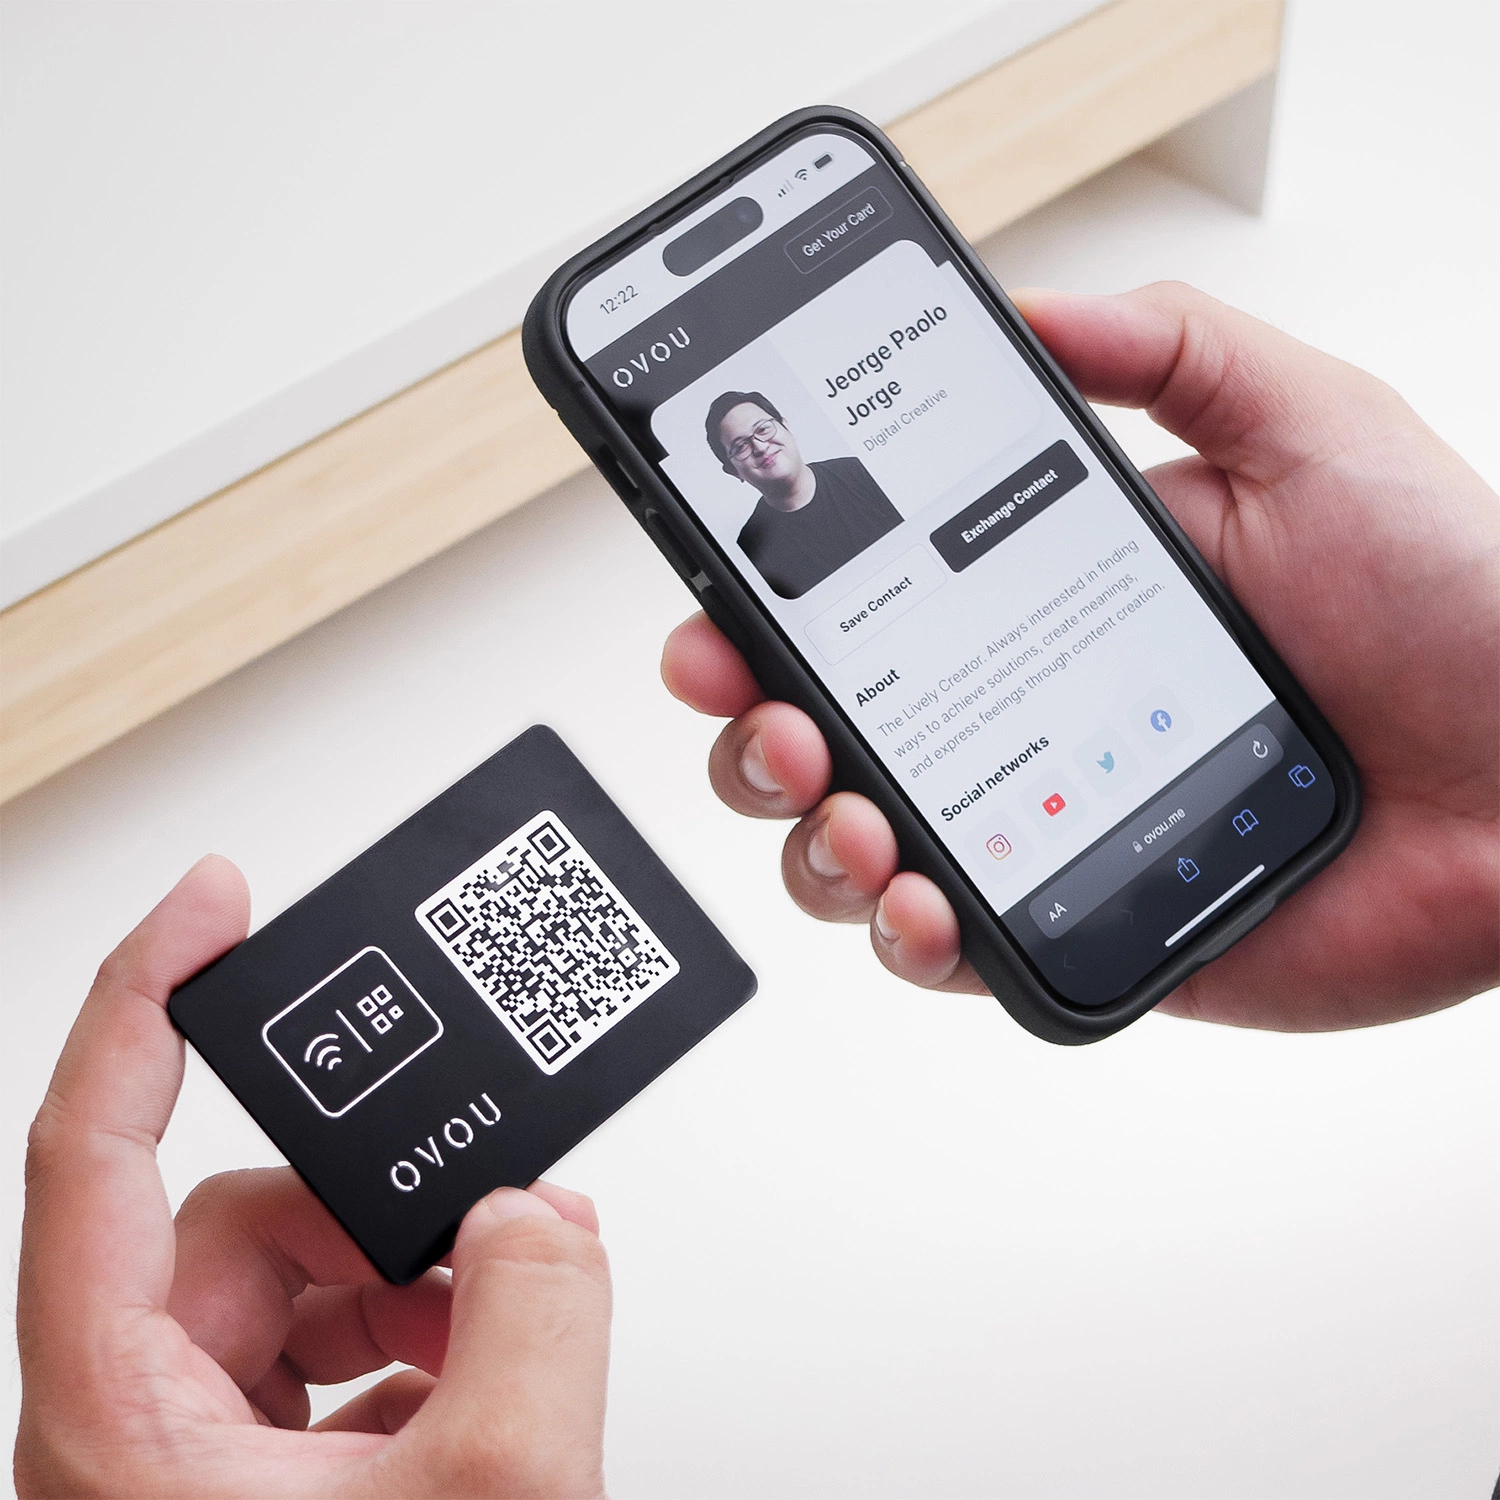 Guy holding OVOU smart business card on left hand with QR facing up and Smartphone on the right hand with OVOU digital business profile on screen.